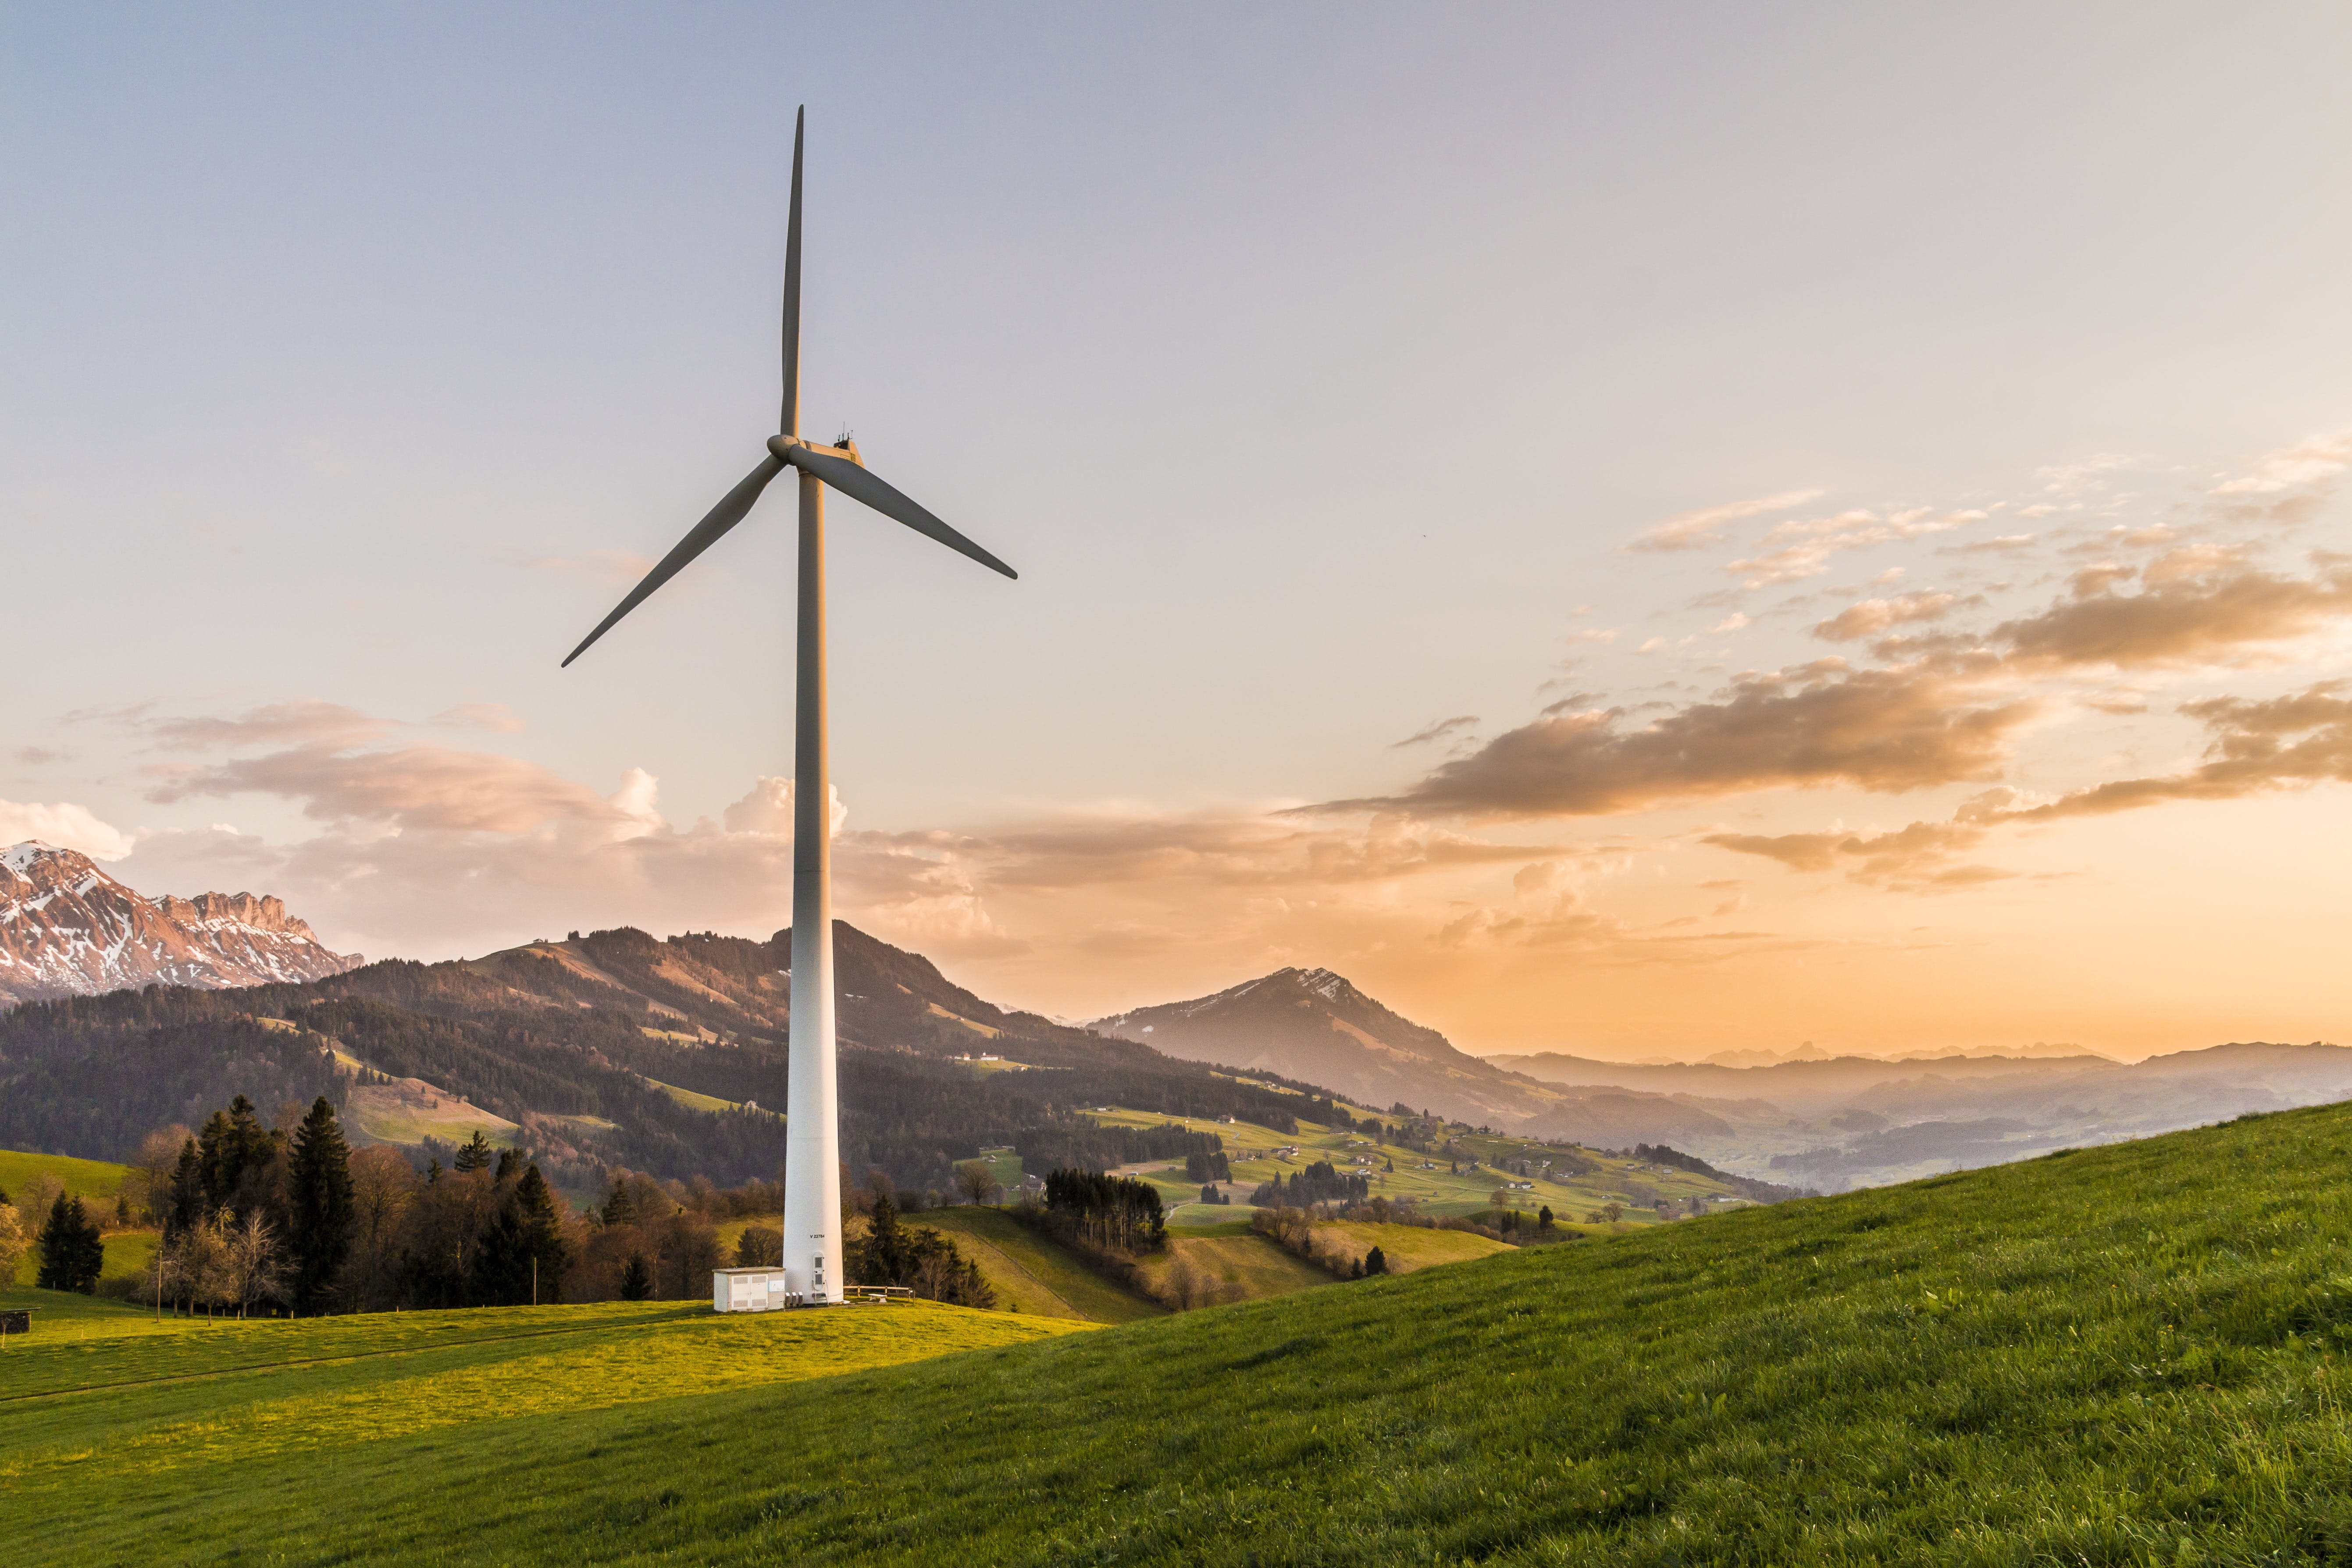 Juniper Green Energy, Envision tie up to develop 300-MW wind project